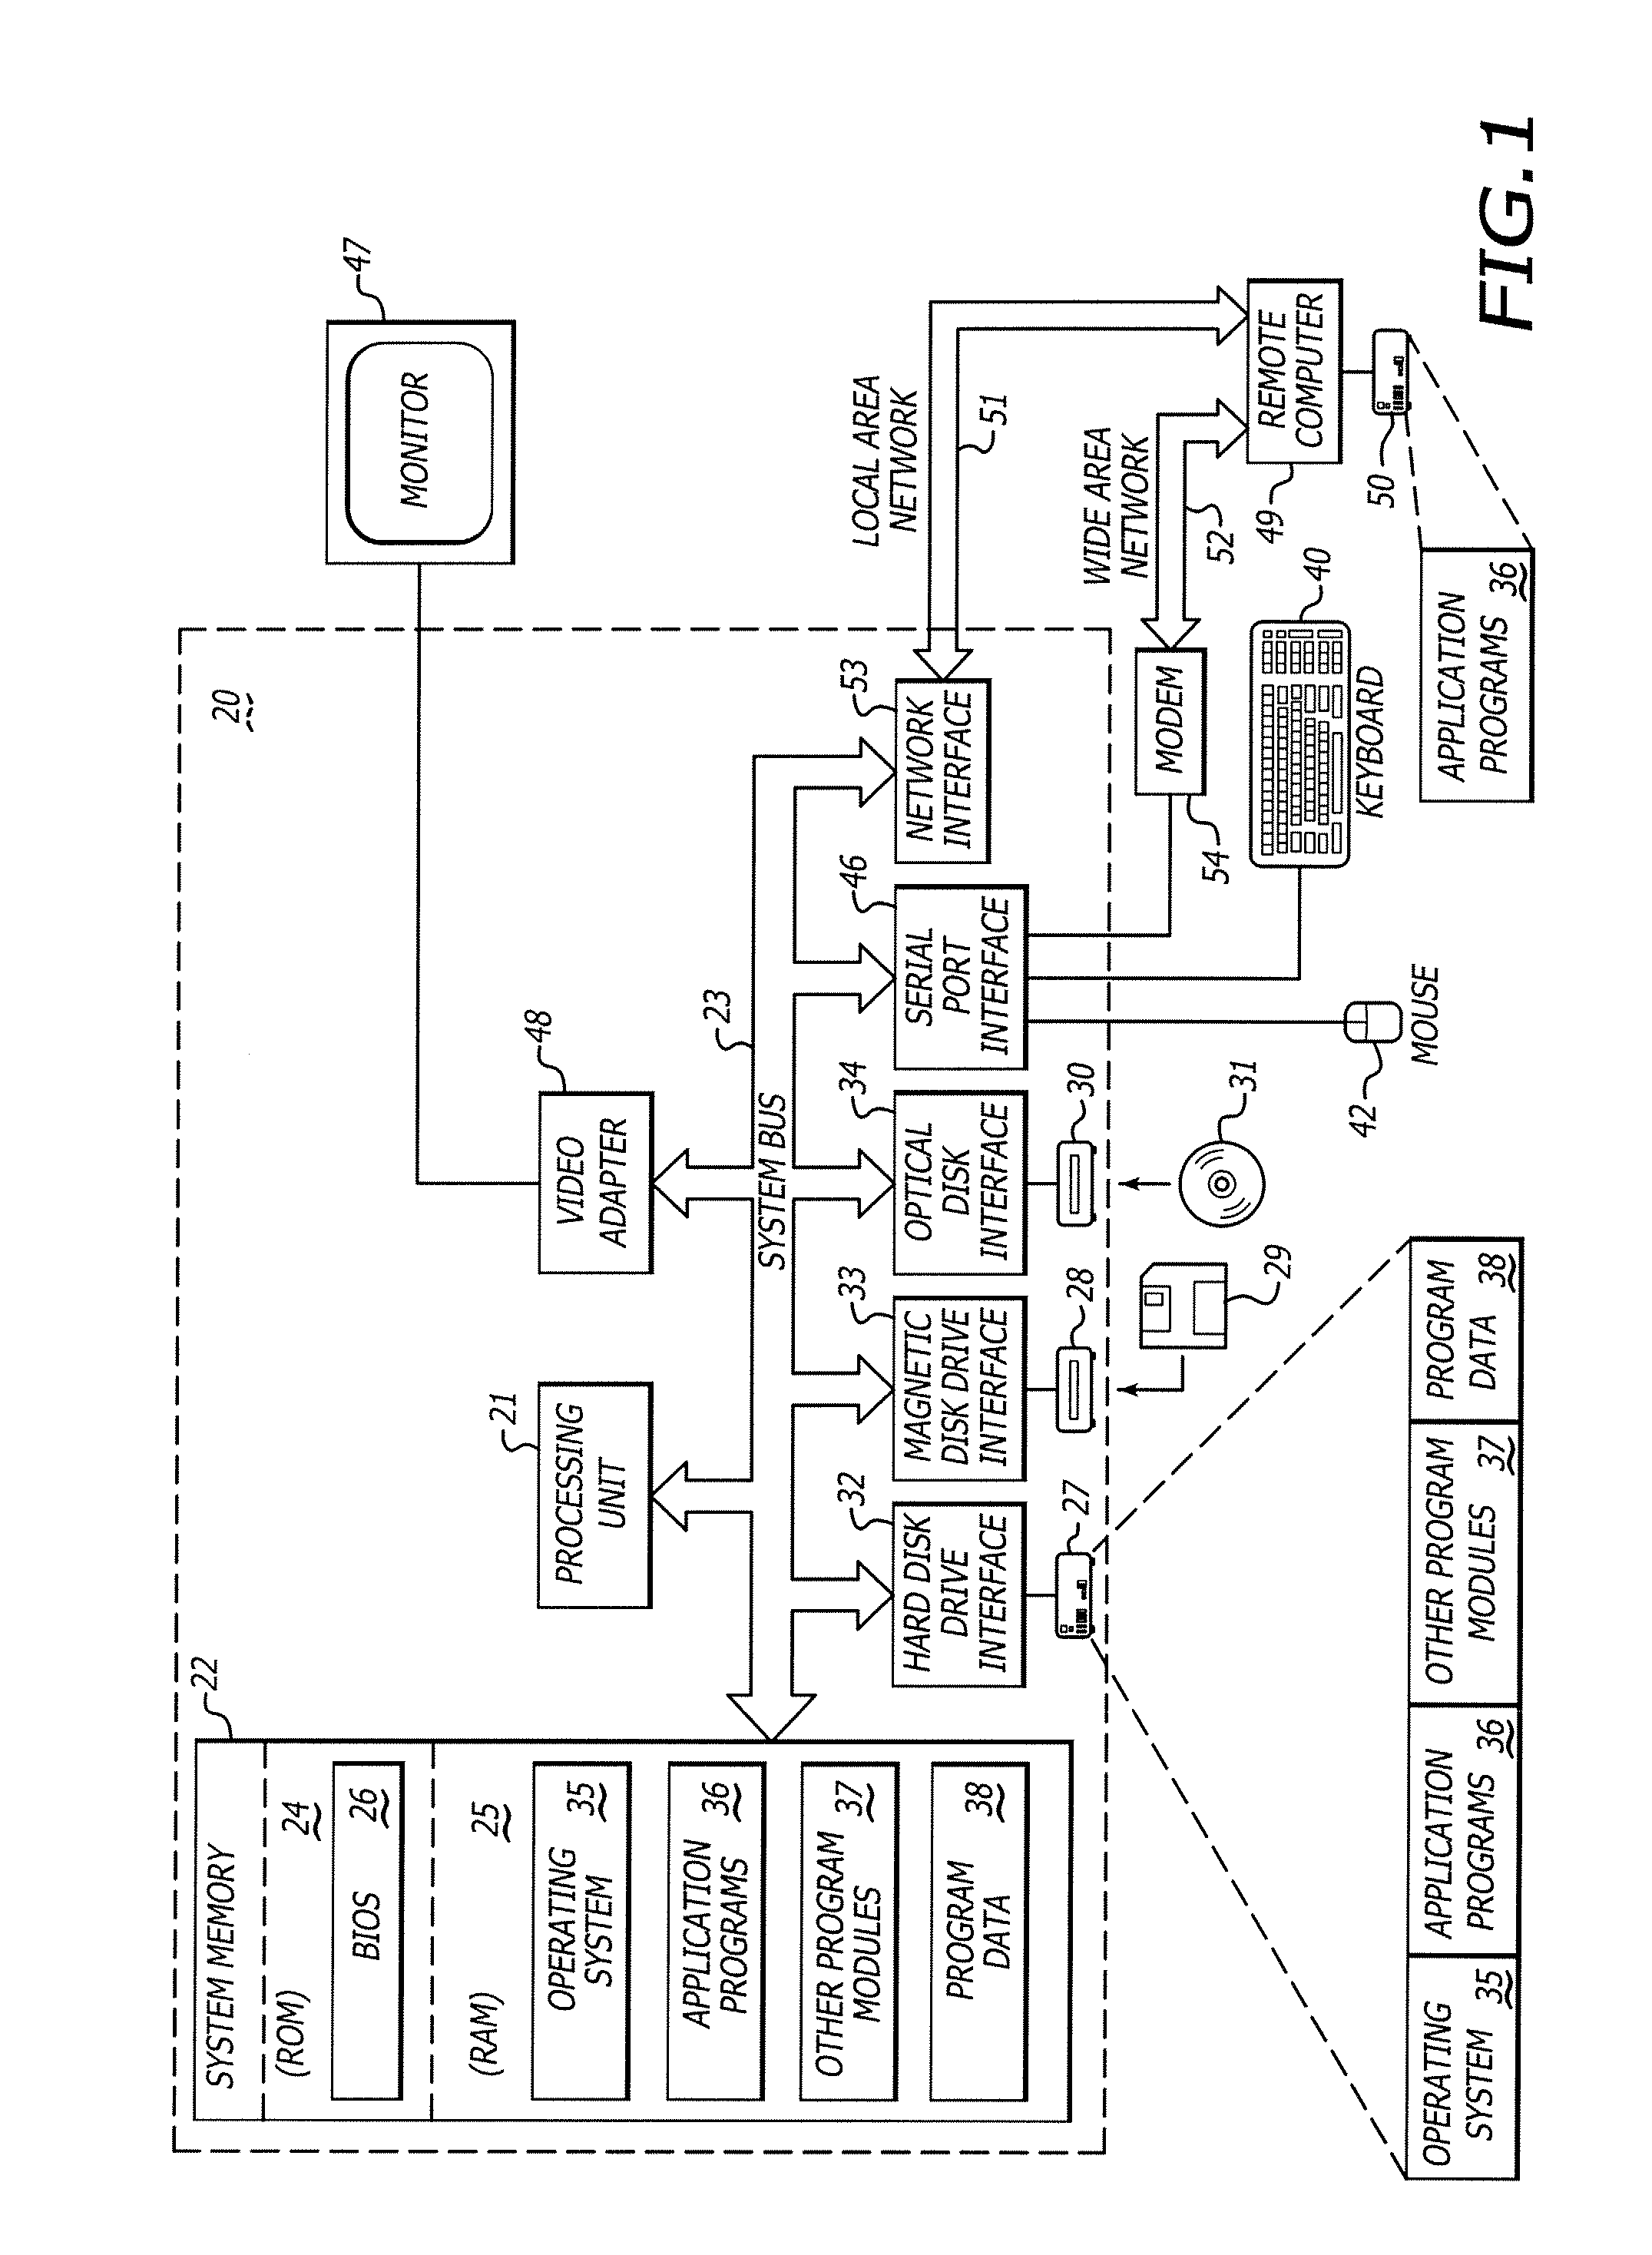 Method and system for correcting payee names and adjusting an account balance for a financial statement